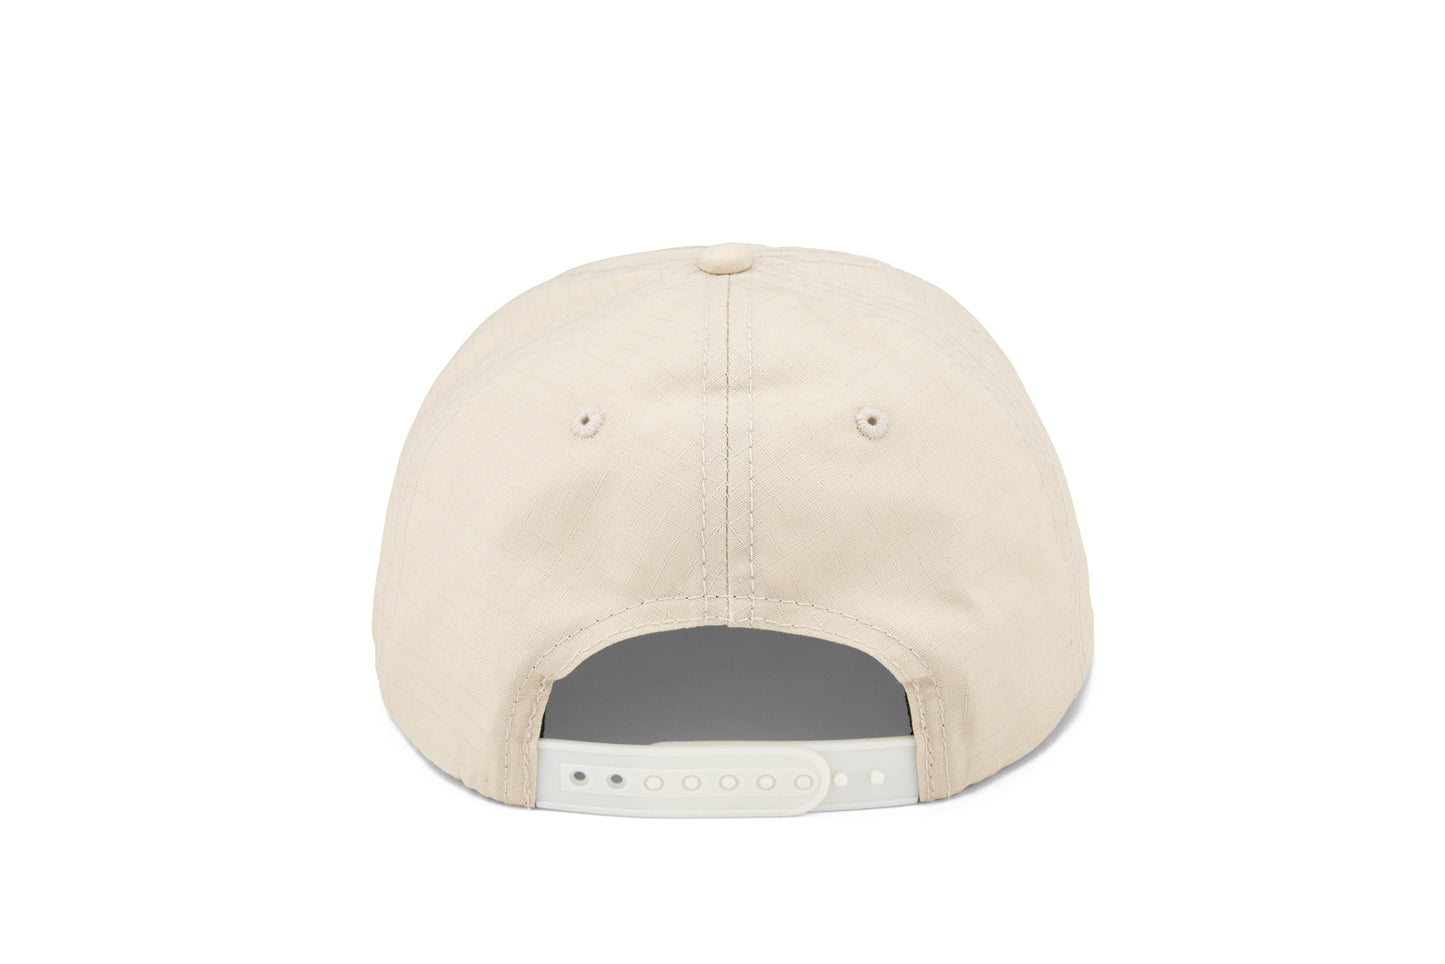 Back of stone colored hat that shows plastic snapback